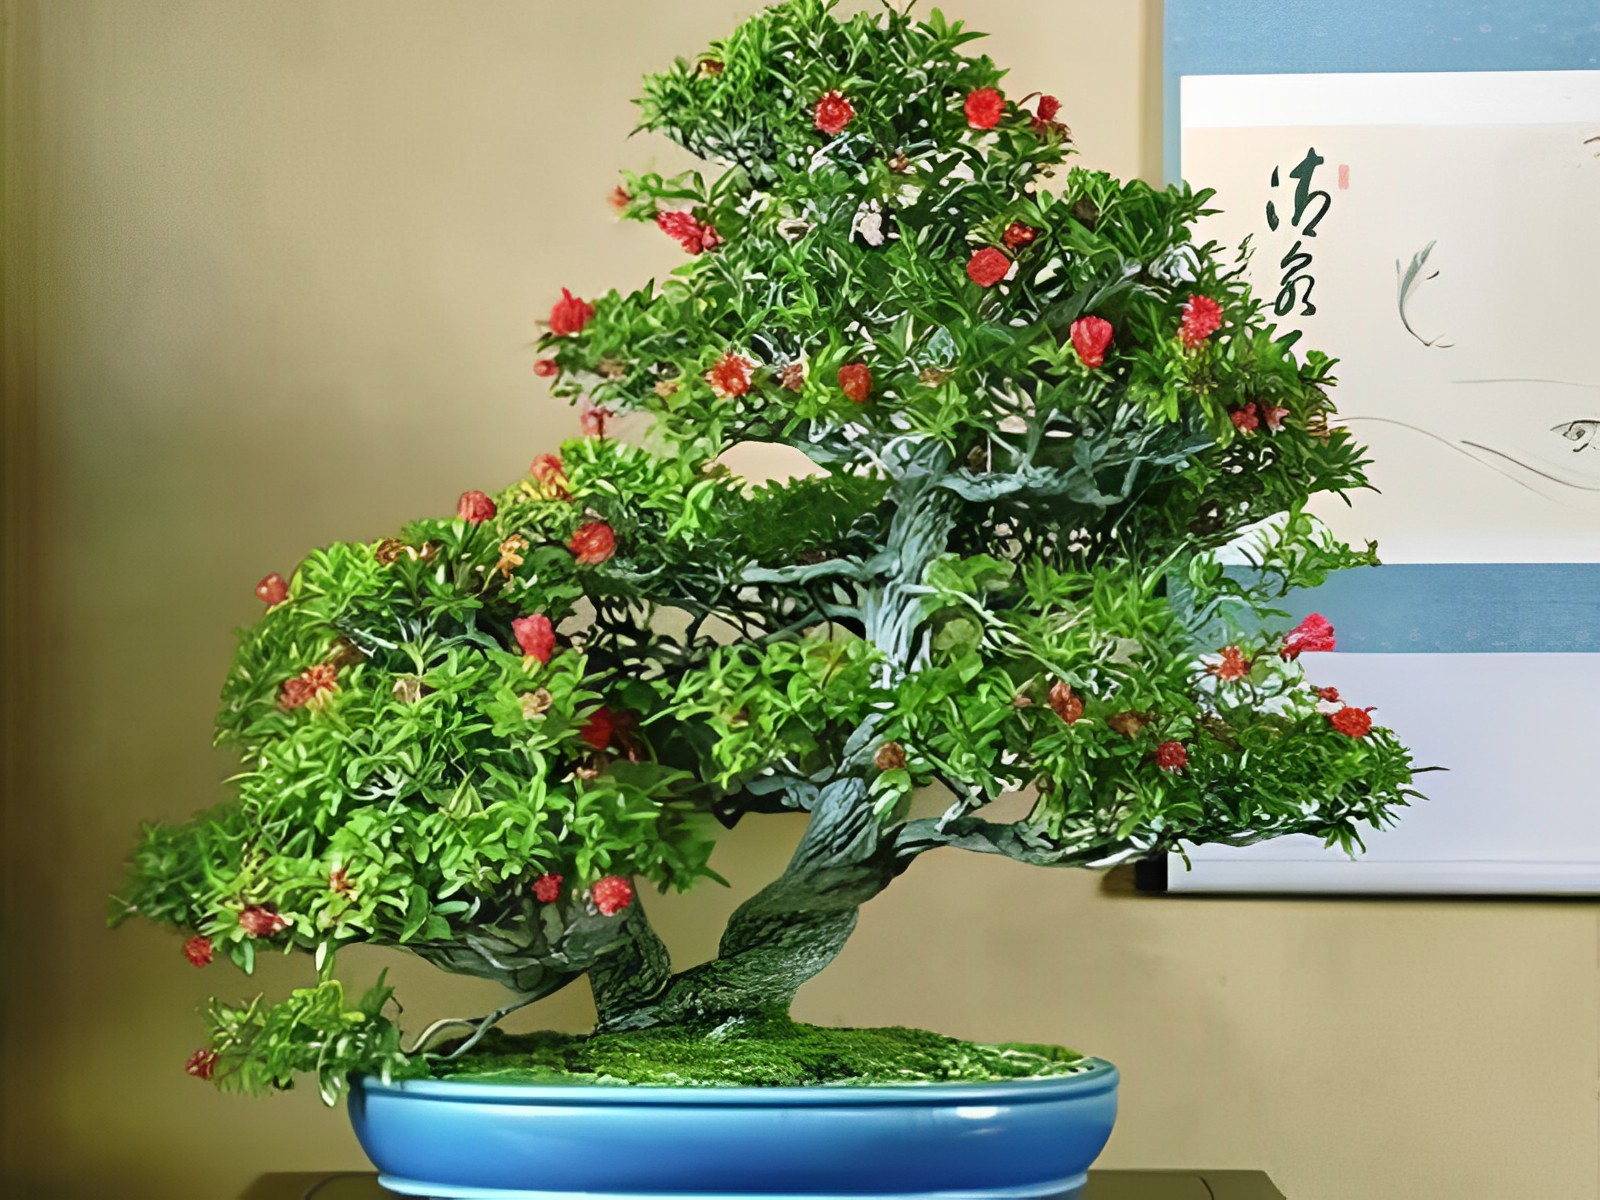 For this fruit-bearing bonsai tree, it's essential to use a soil mixture that is both rich in nutrients and slightly acidic.